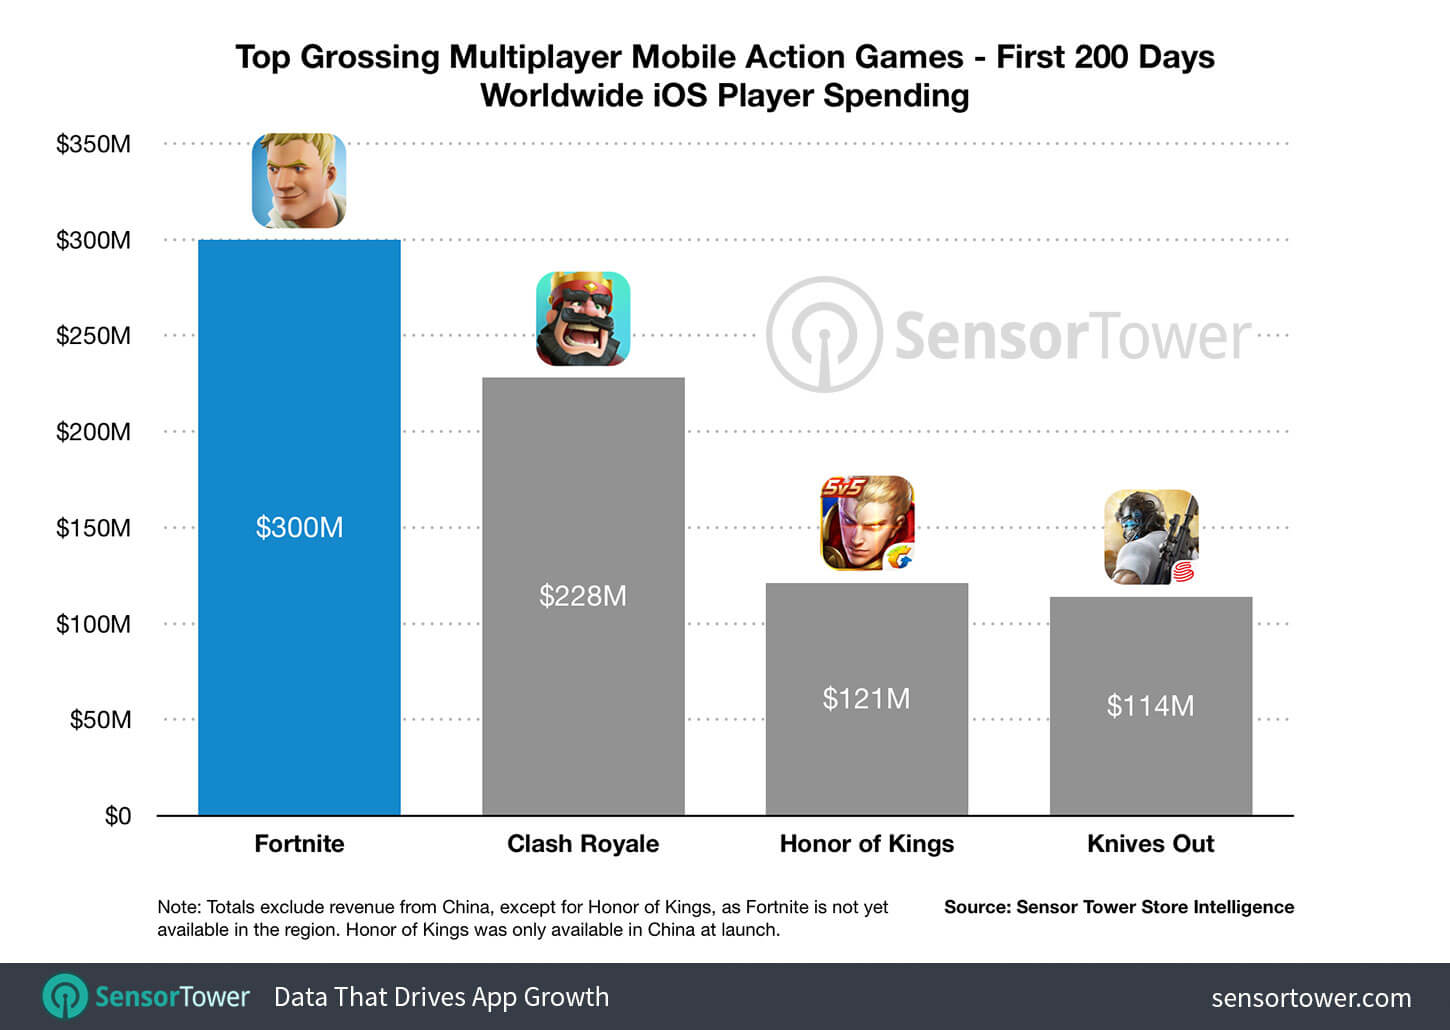 SensorTower data on mobile games launch and results.